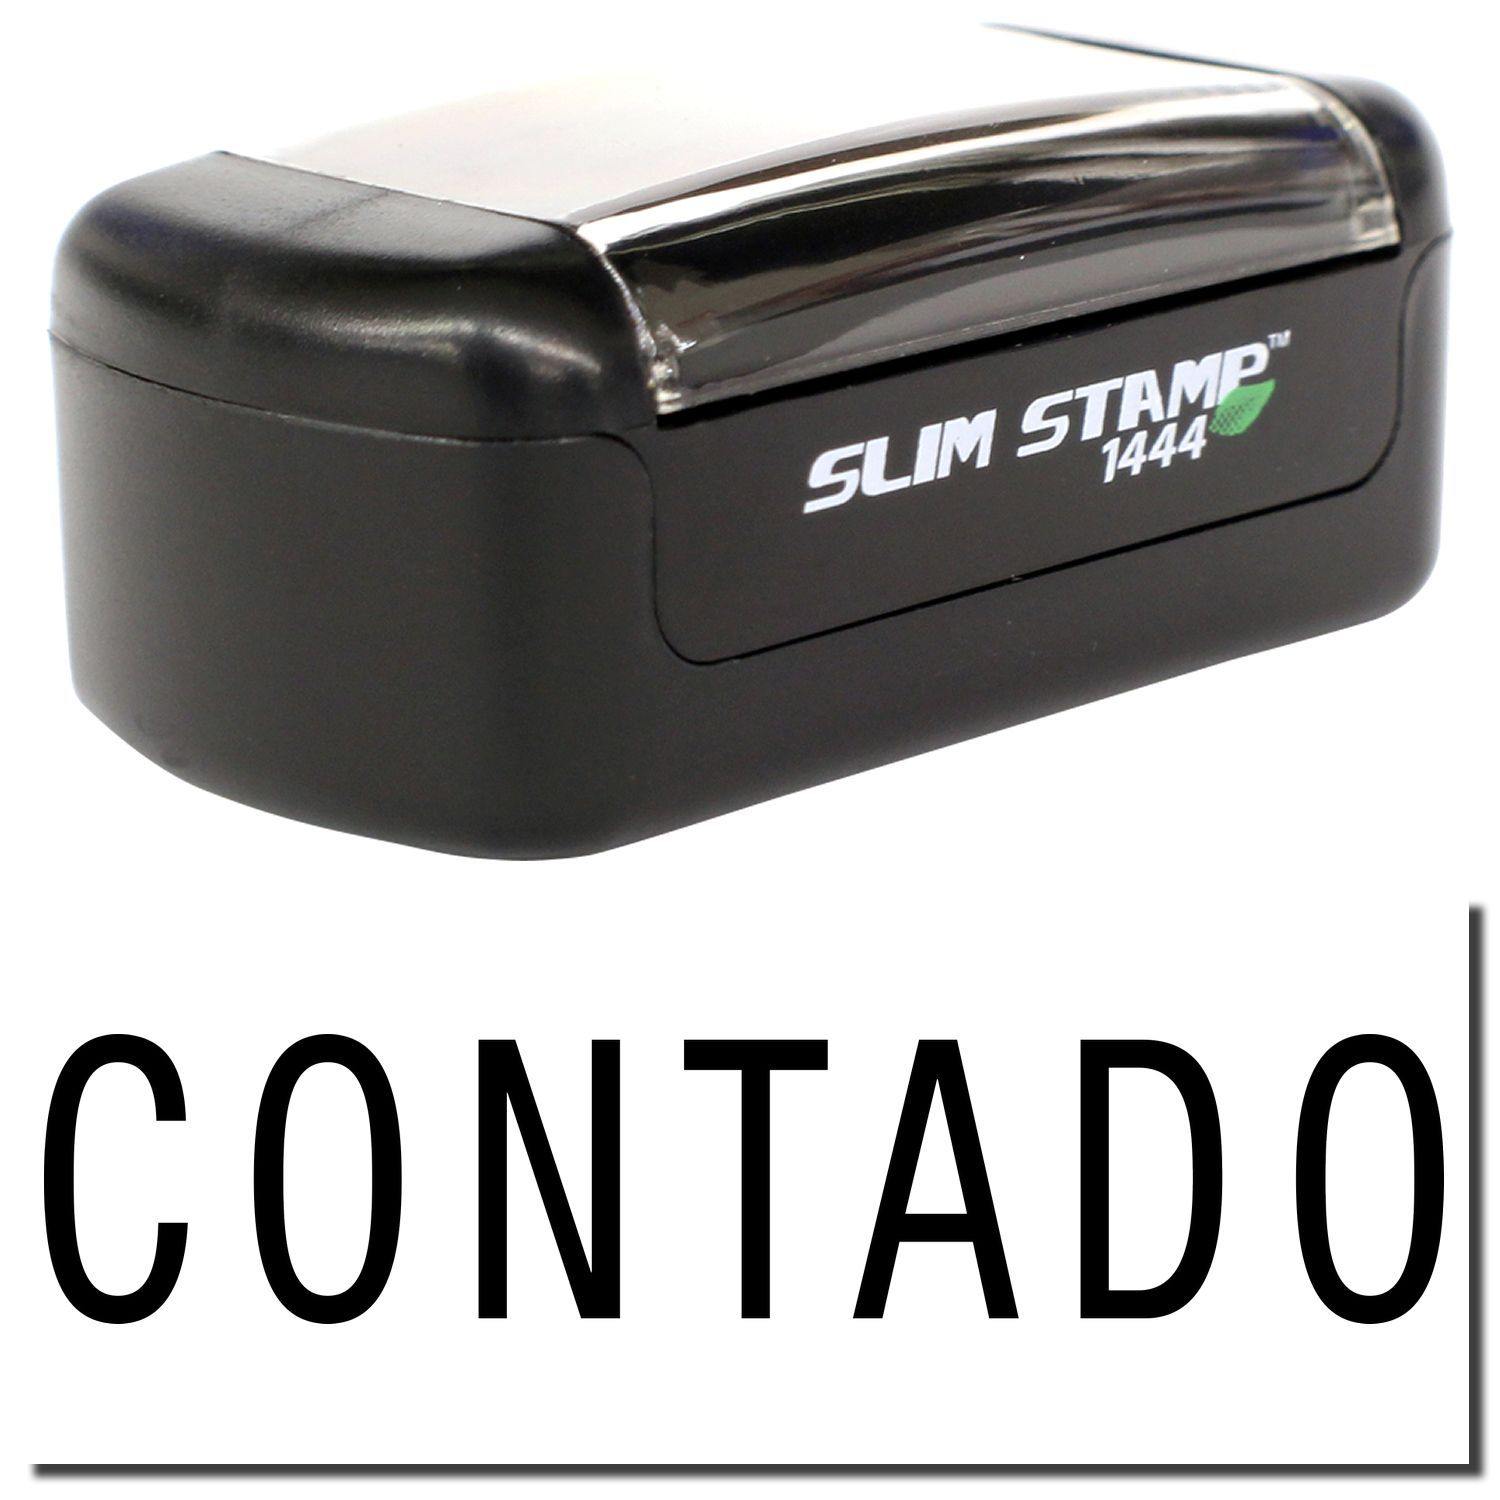 A stock office pre-inked stamp with a stamped image showing how the text "CONTADO" is displayed after stamping.